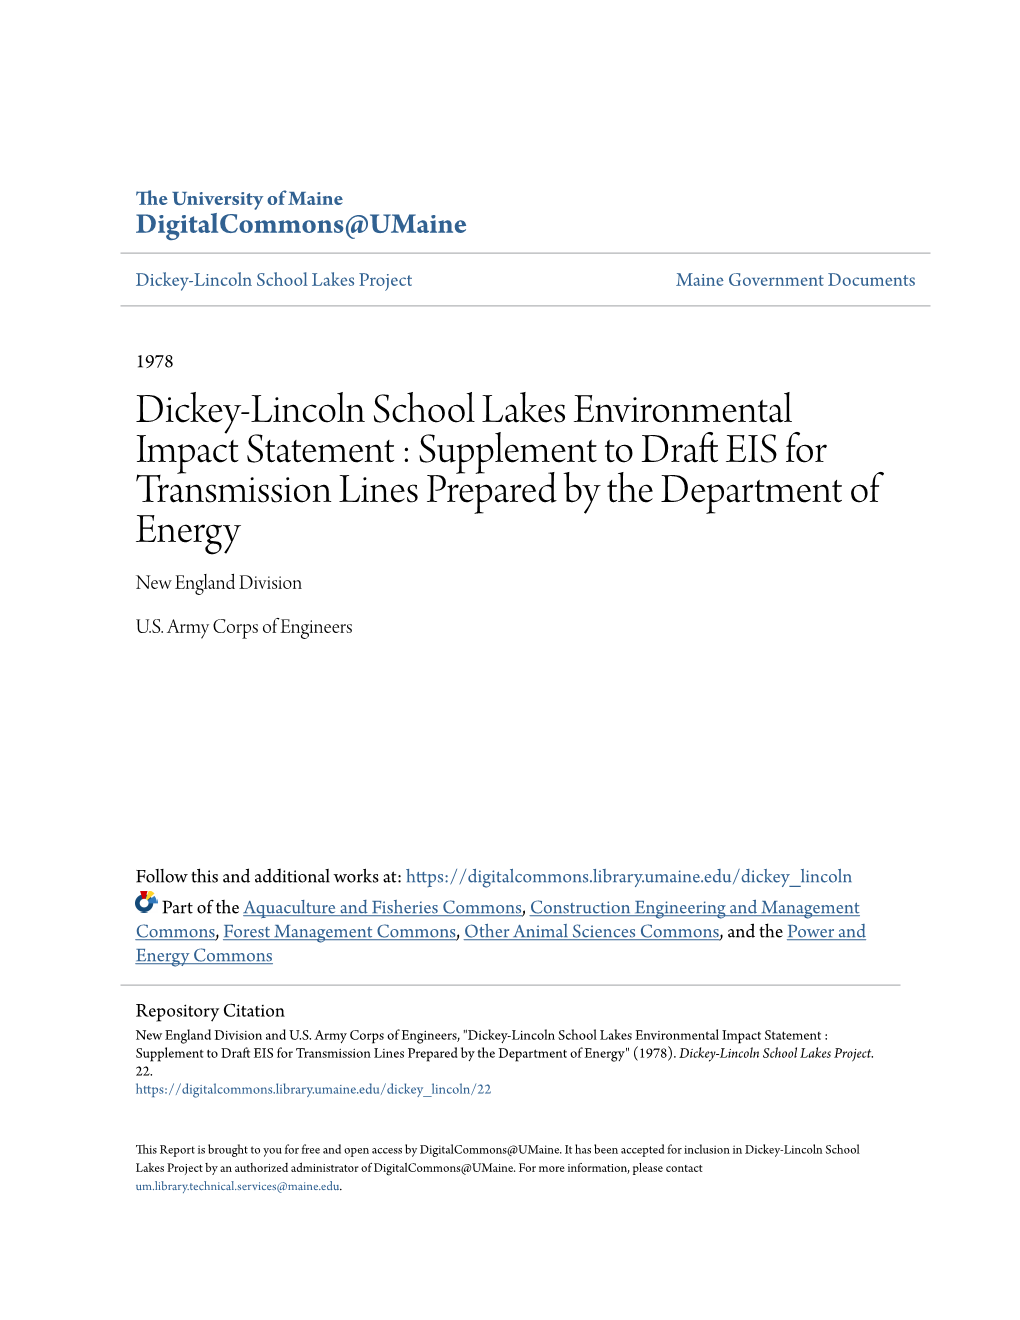 Dickey-Lincoln School Lakes Environmental Impact Statement : Supplement to Draft EIS for Transmission Lines Prepared by the Department of Energy New England Division